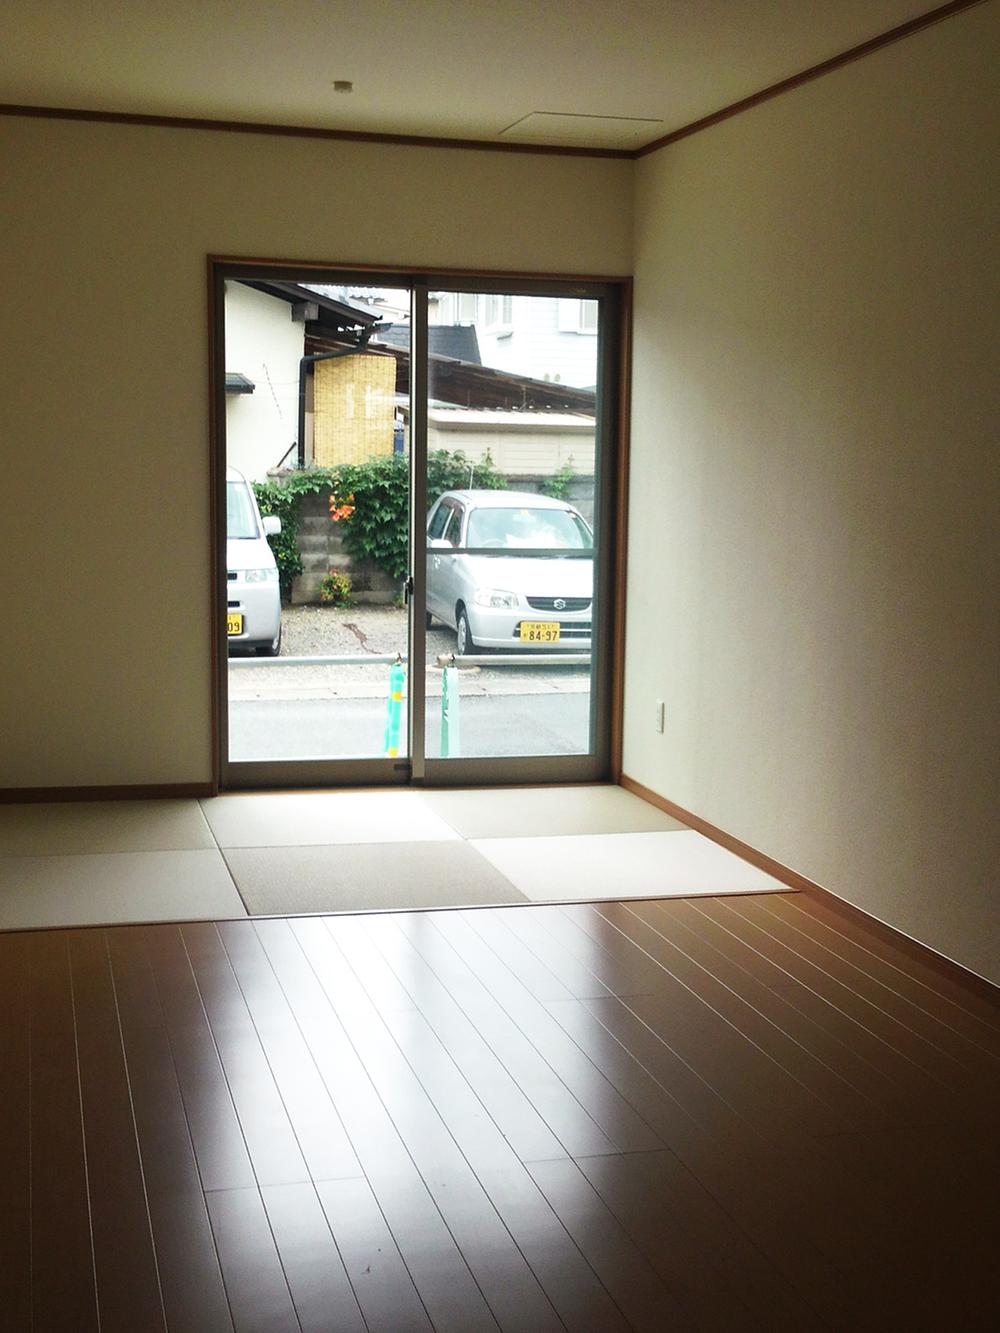 Non-living room. It will stiffness relieved if there is a tatami room ☆ Nap of children Ya, Please mom relaxing time ☆ June 2013 shooting